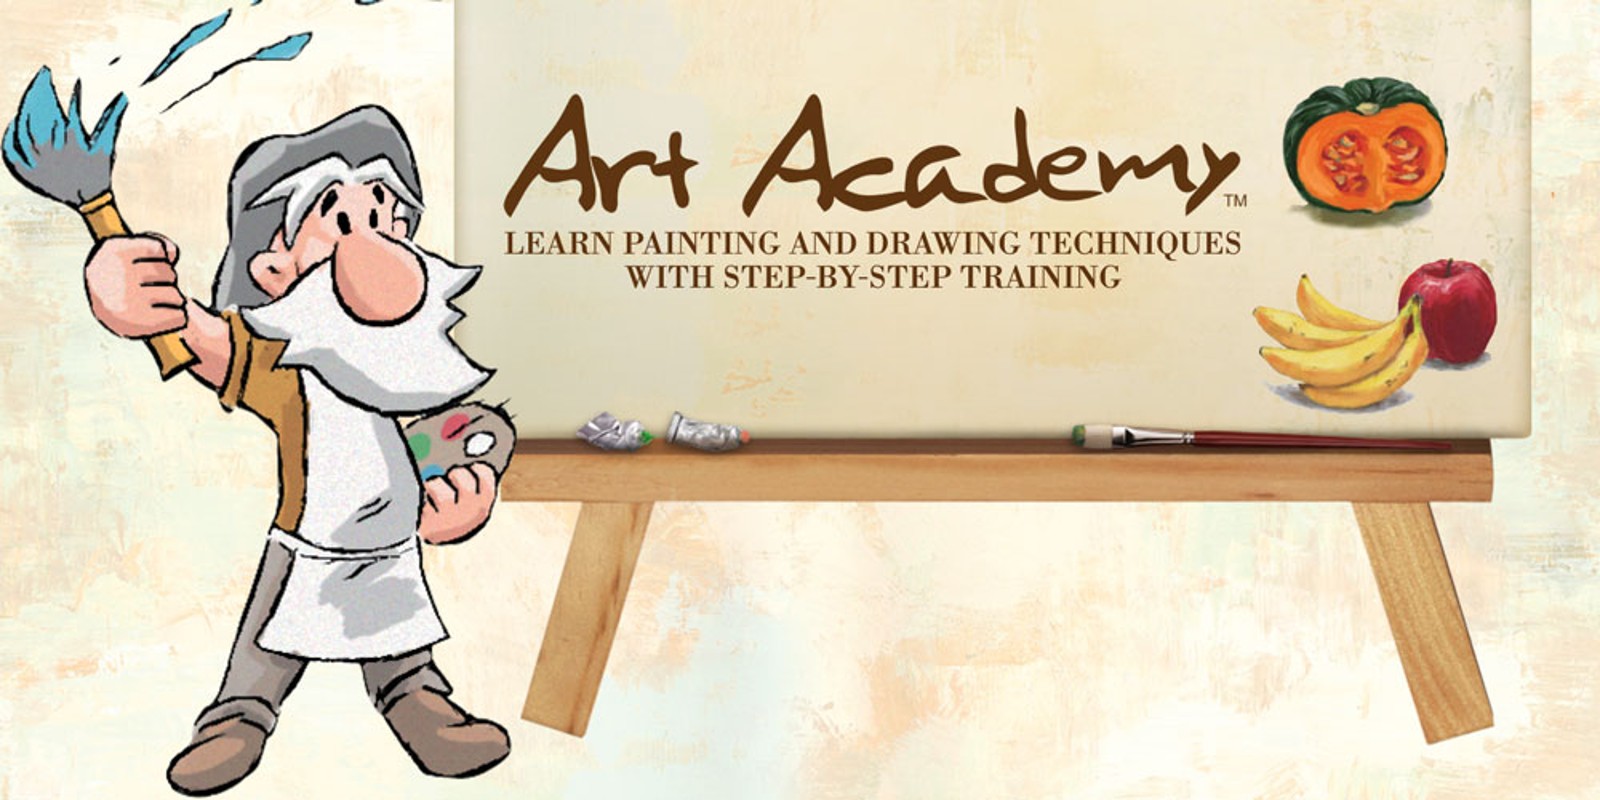 Art Academy: Learn Painting and Drawing Techniques with Step-by-Step Training